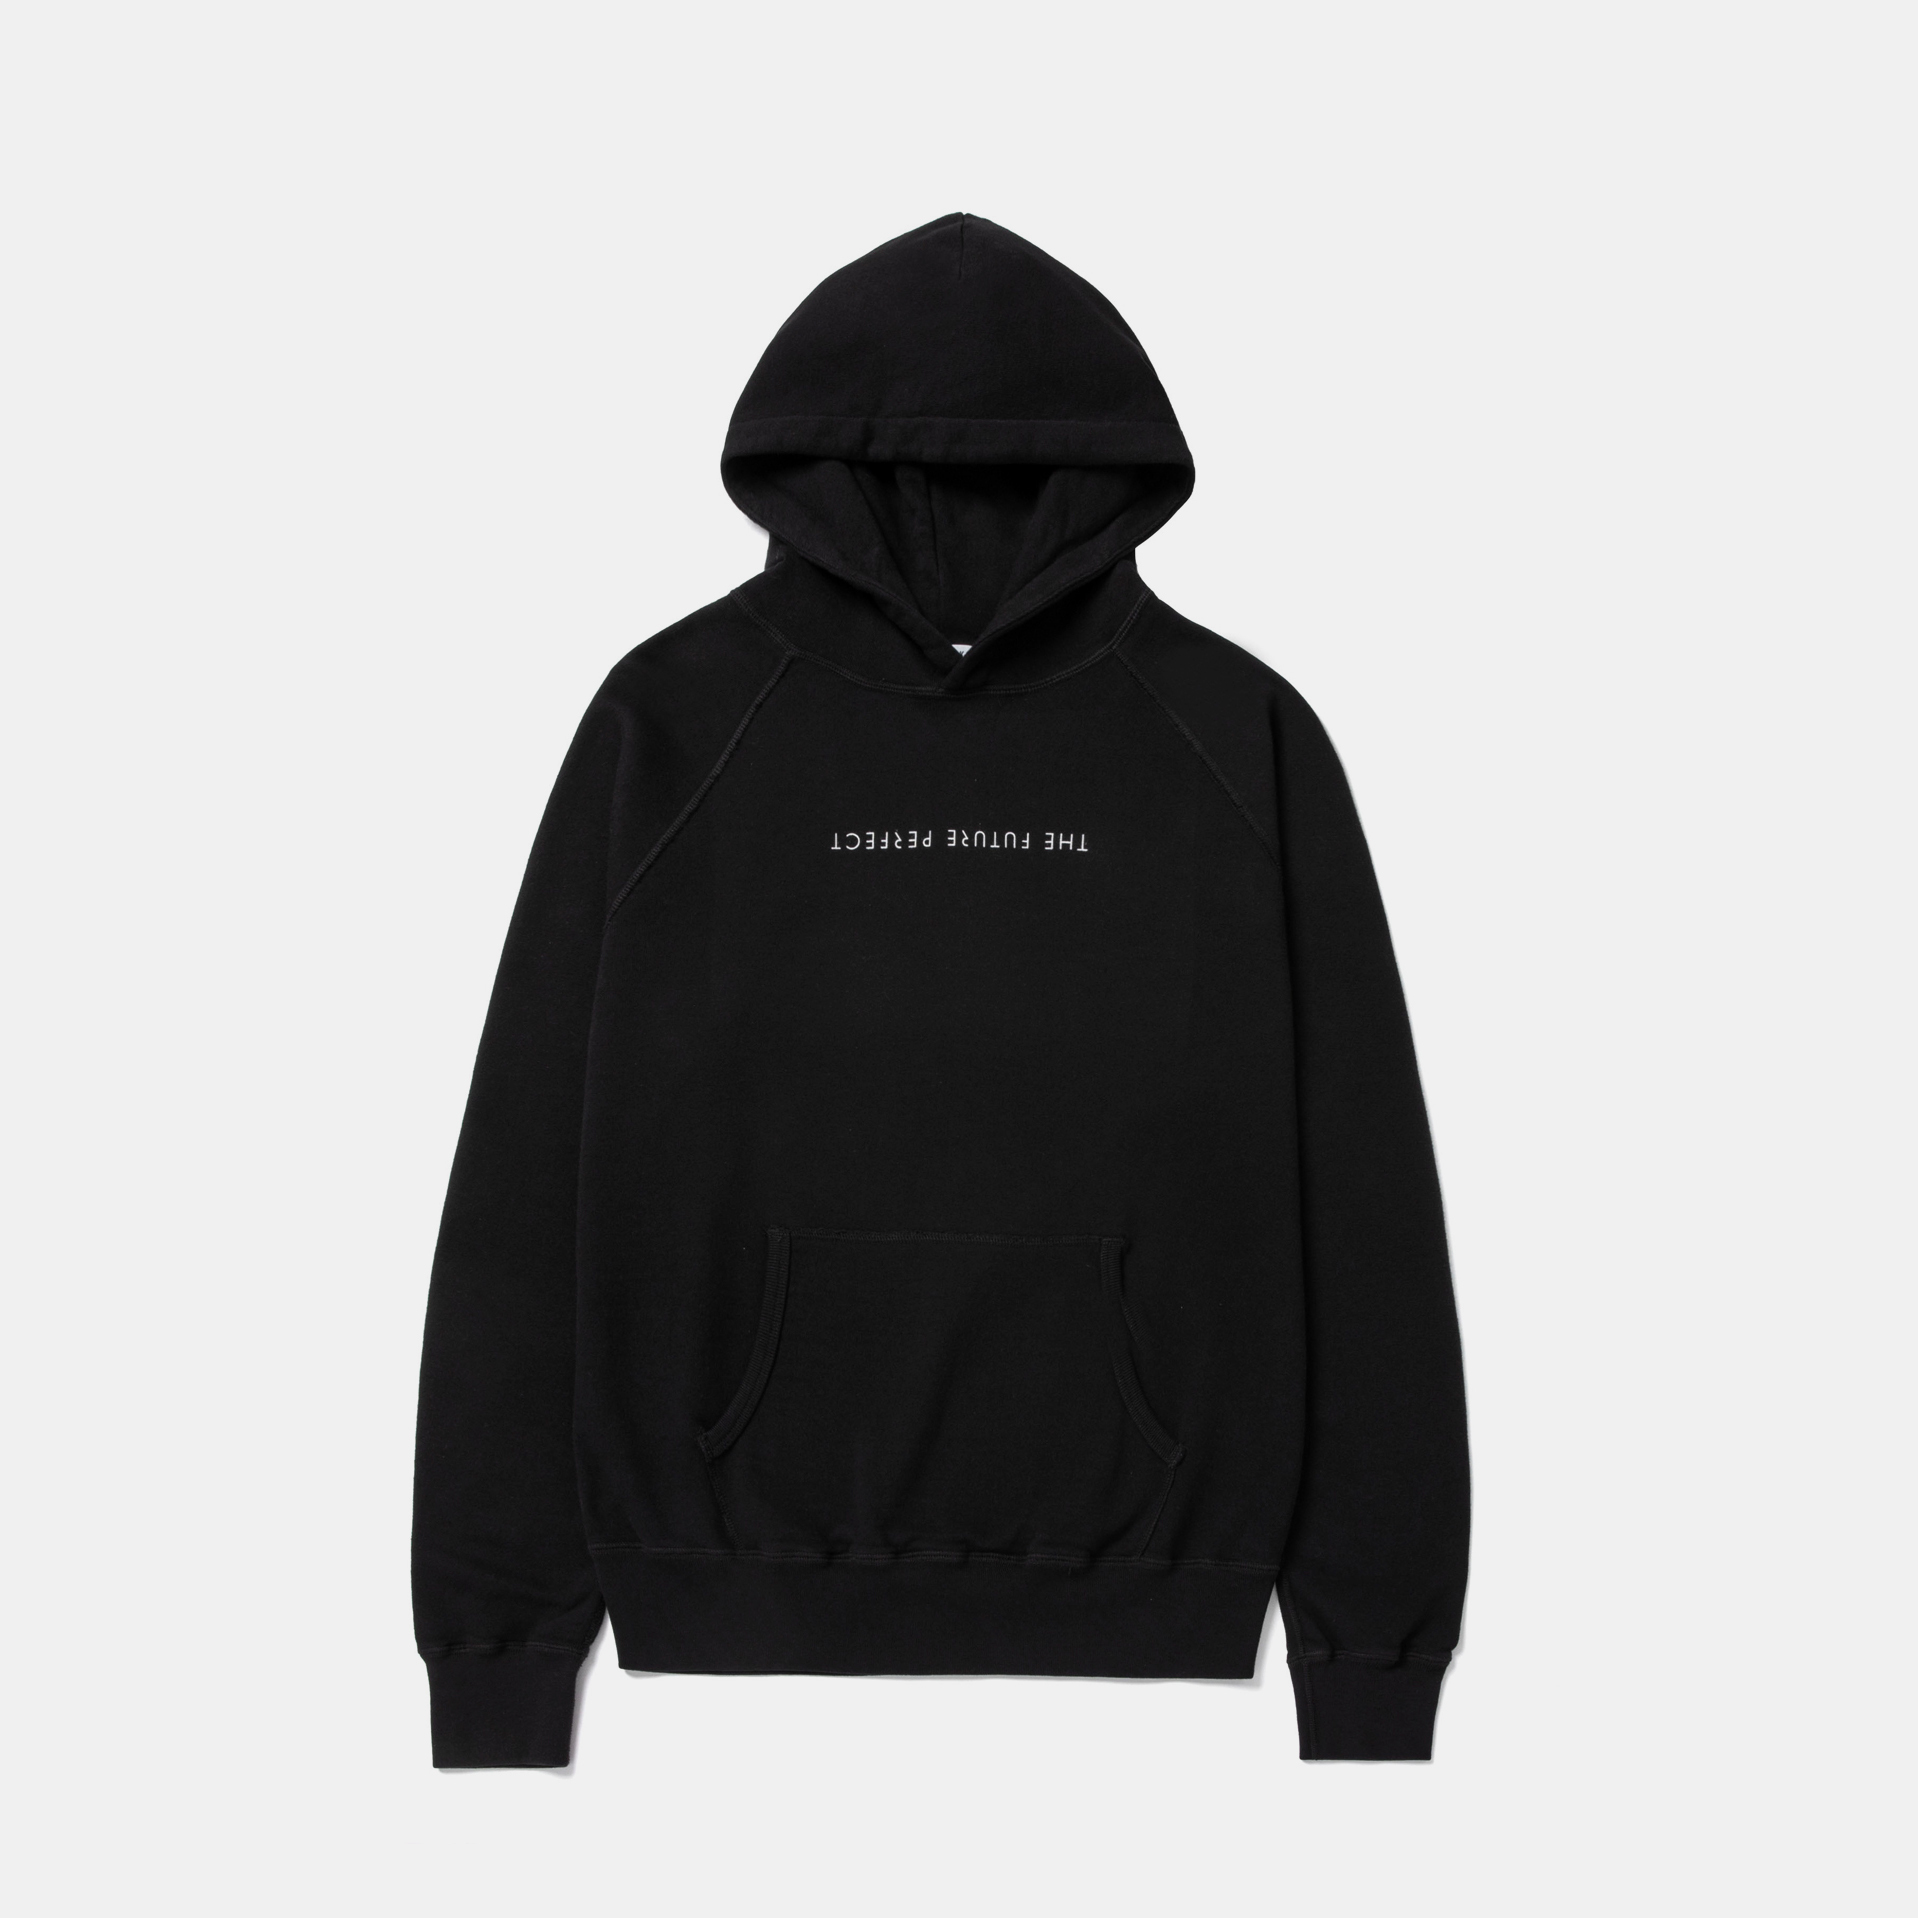 tfp hoodie by hiro clark for the future perfect